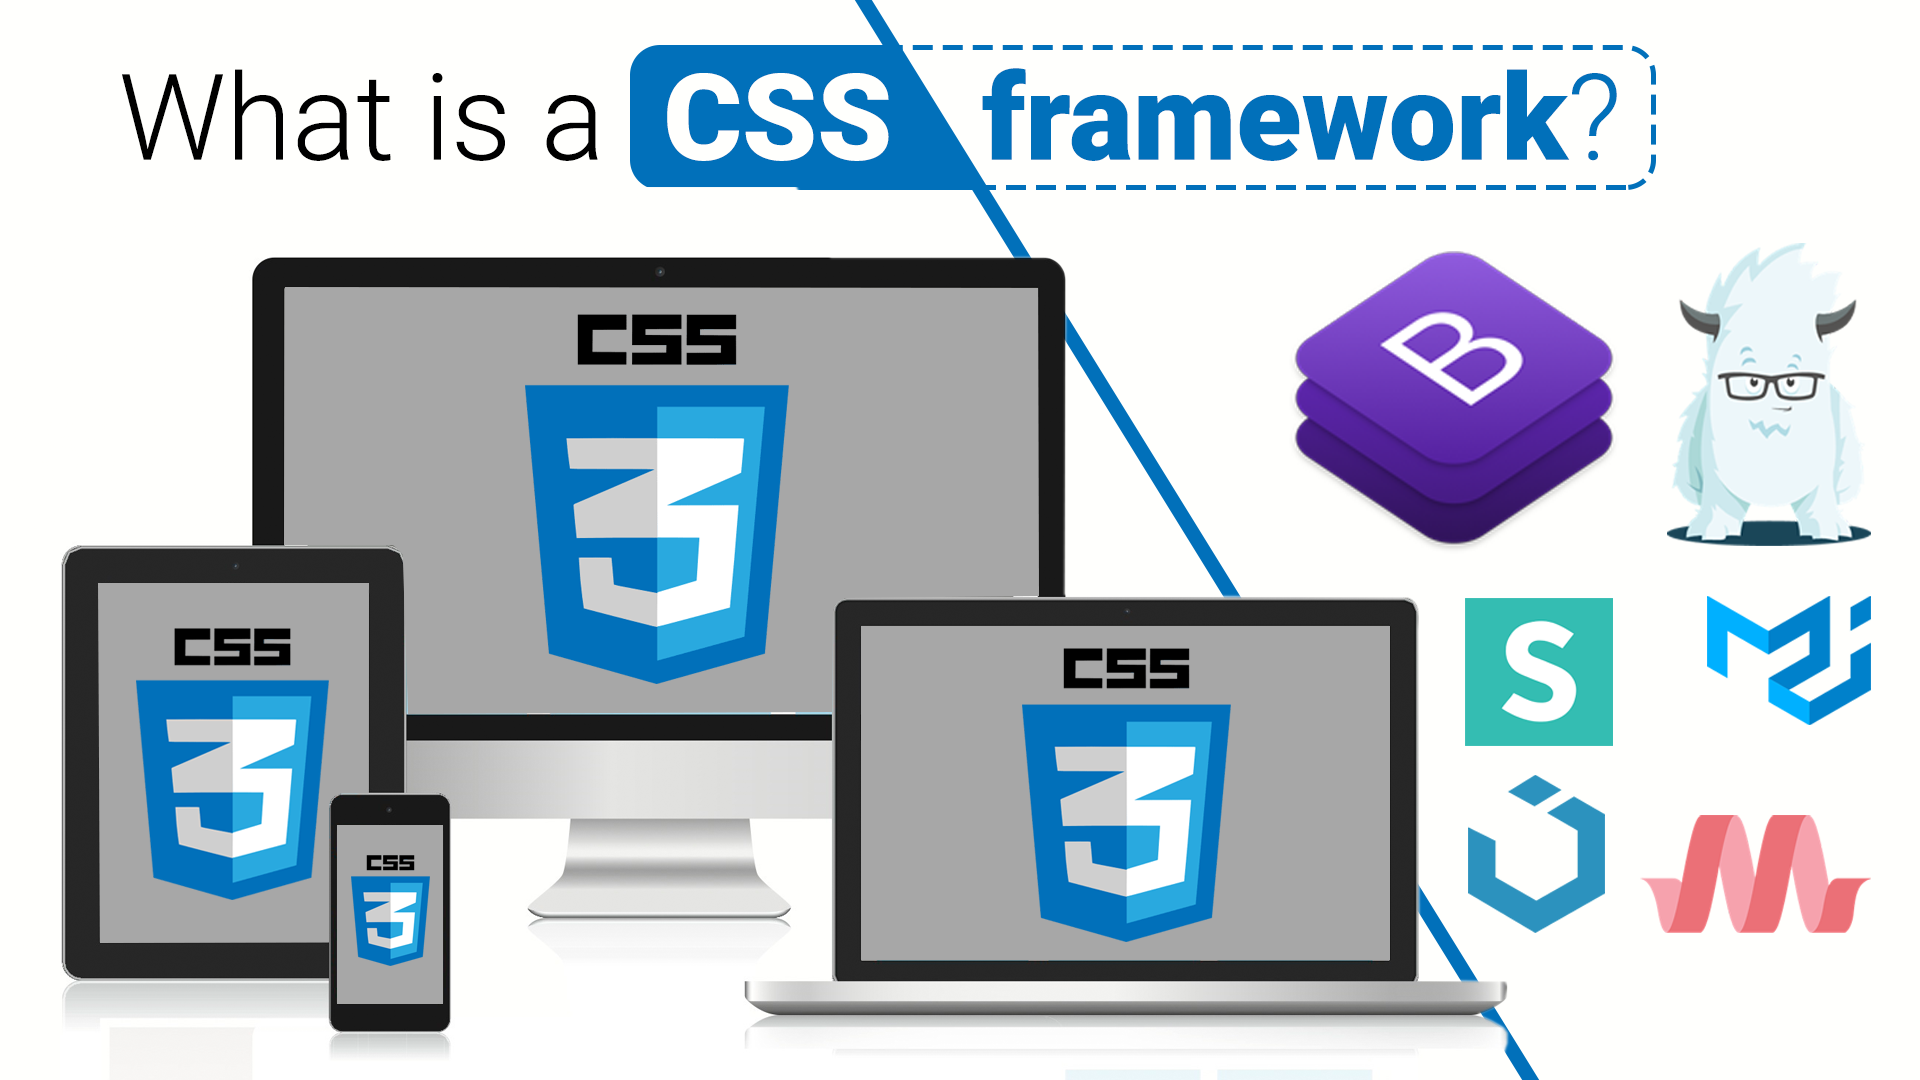 What is a CSS framework